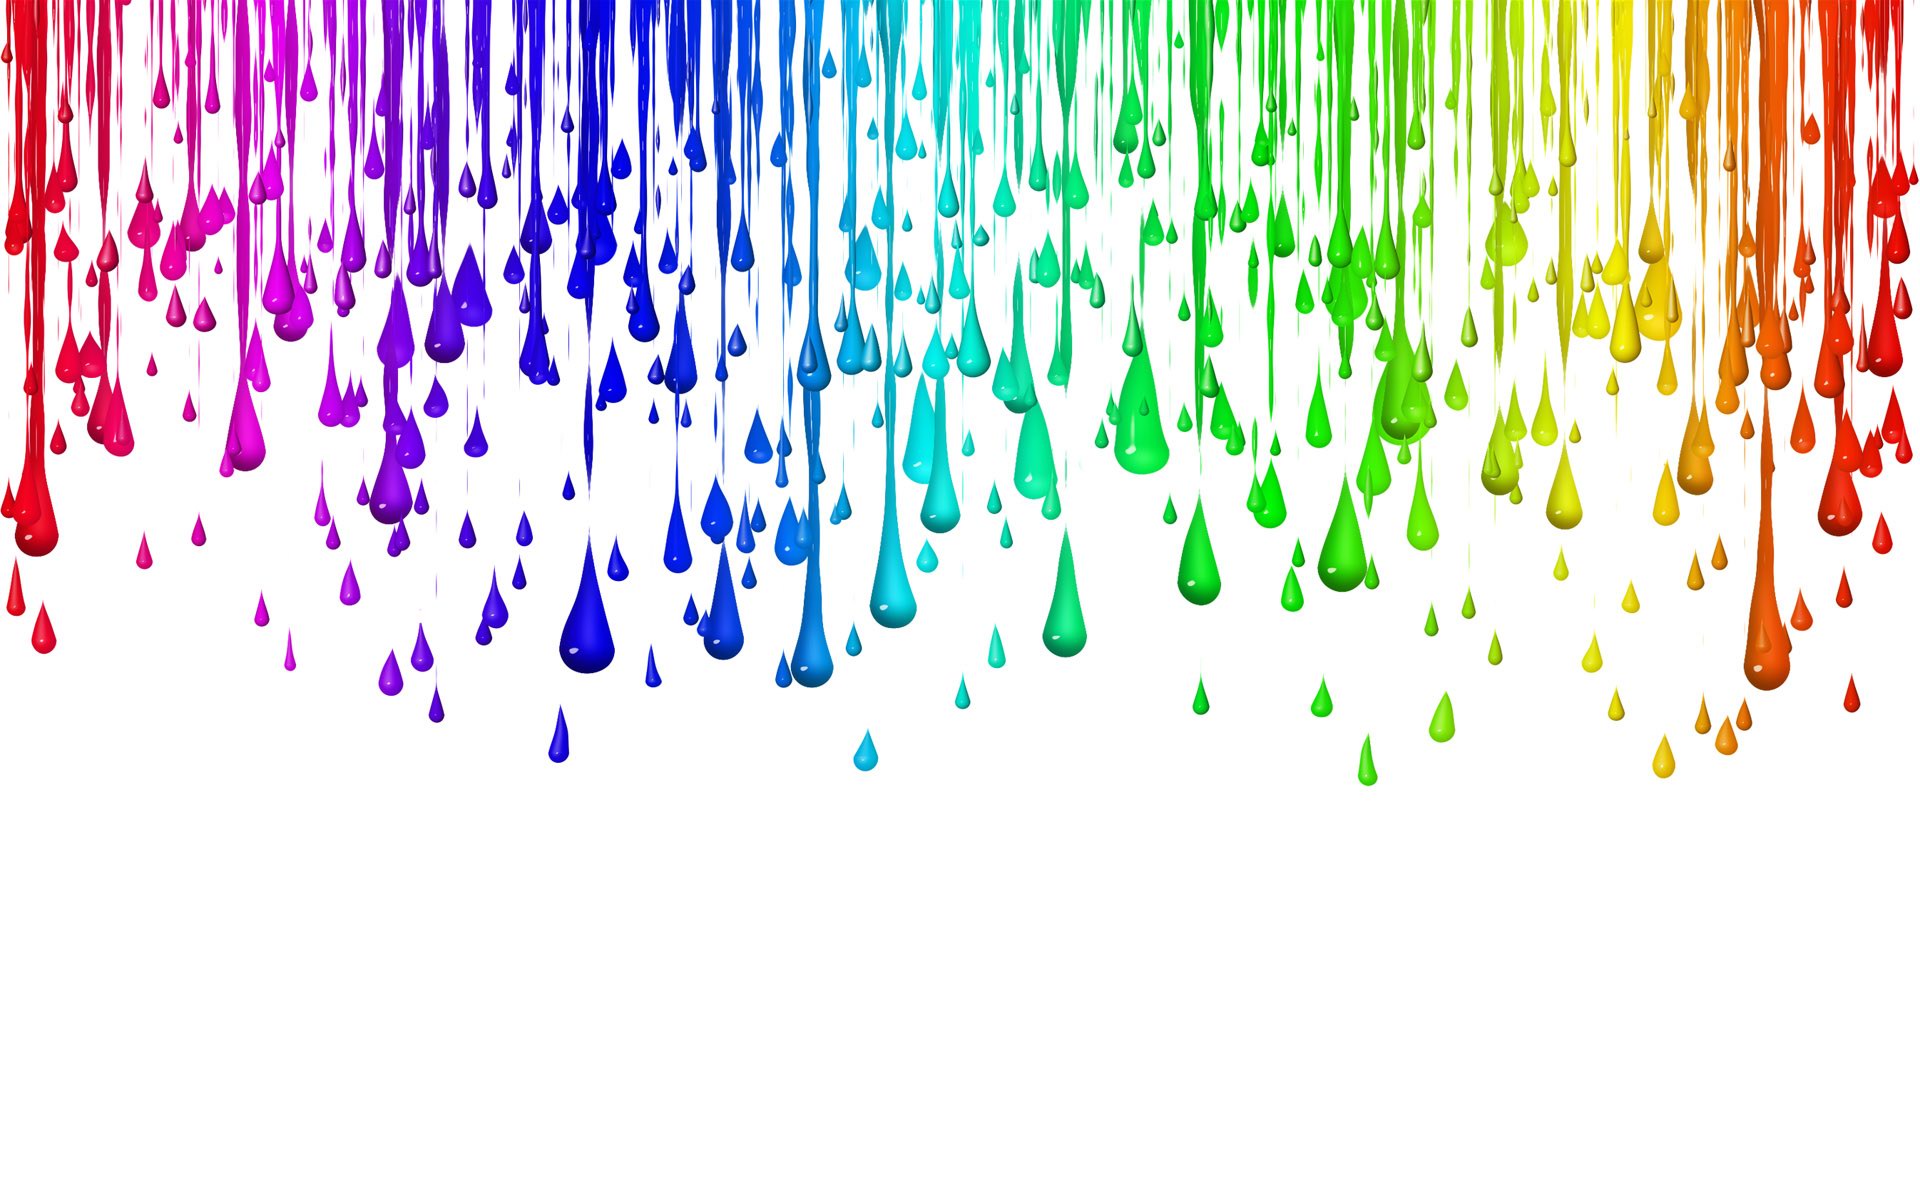 Colorful Drops of Water Wallpaper Background 1920x1200